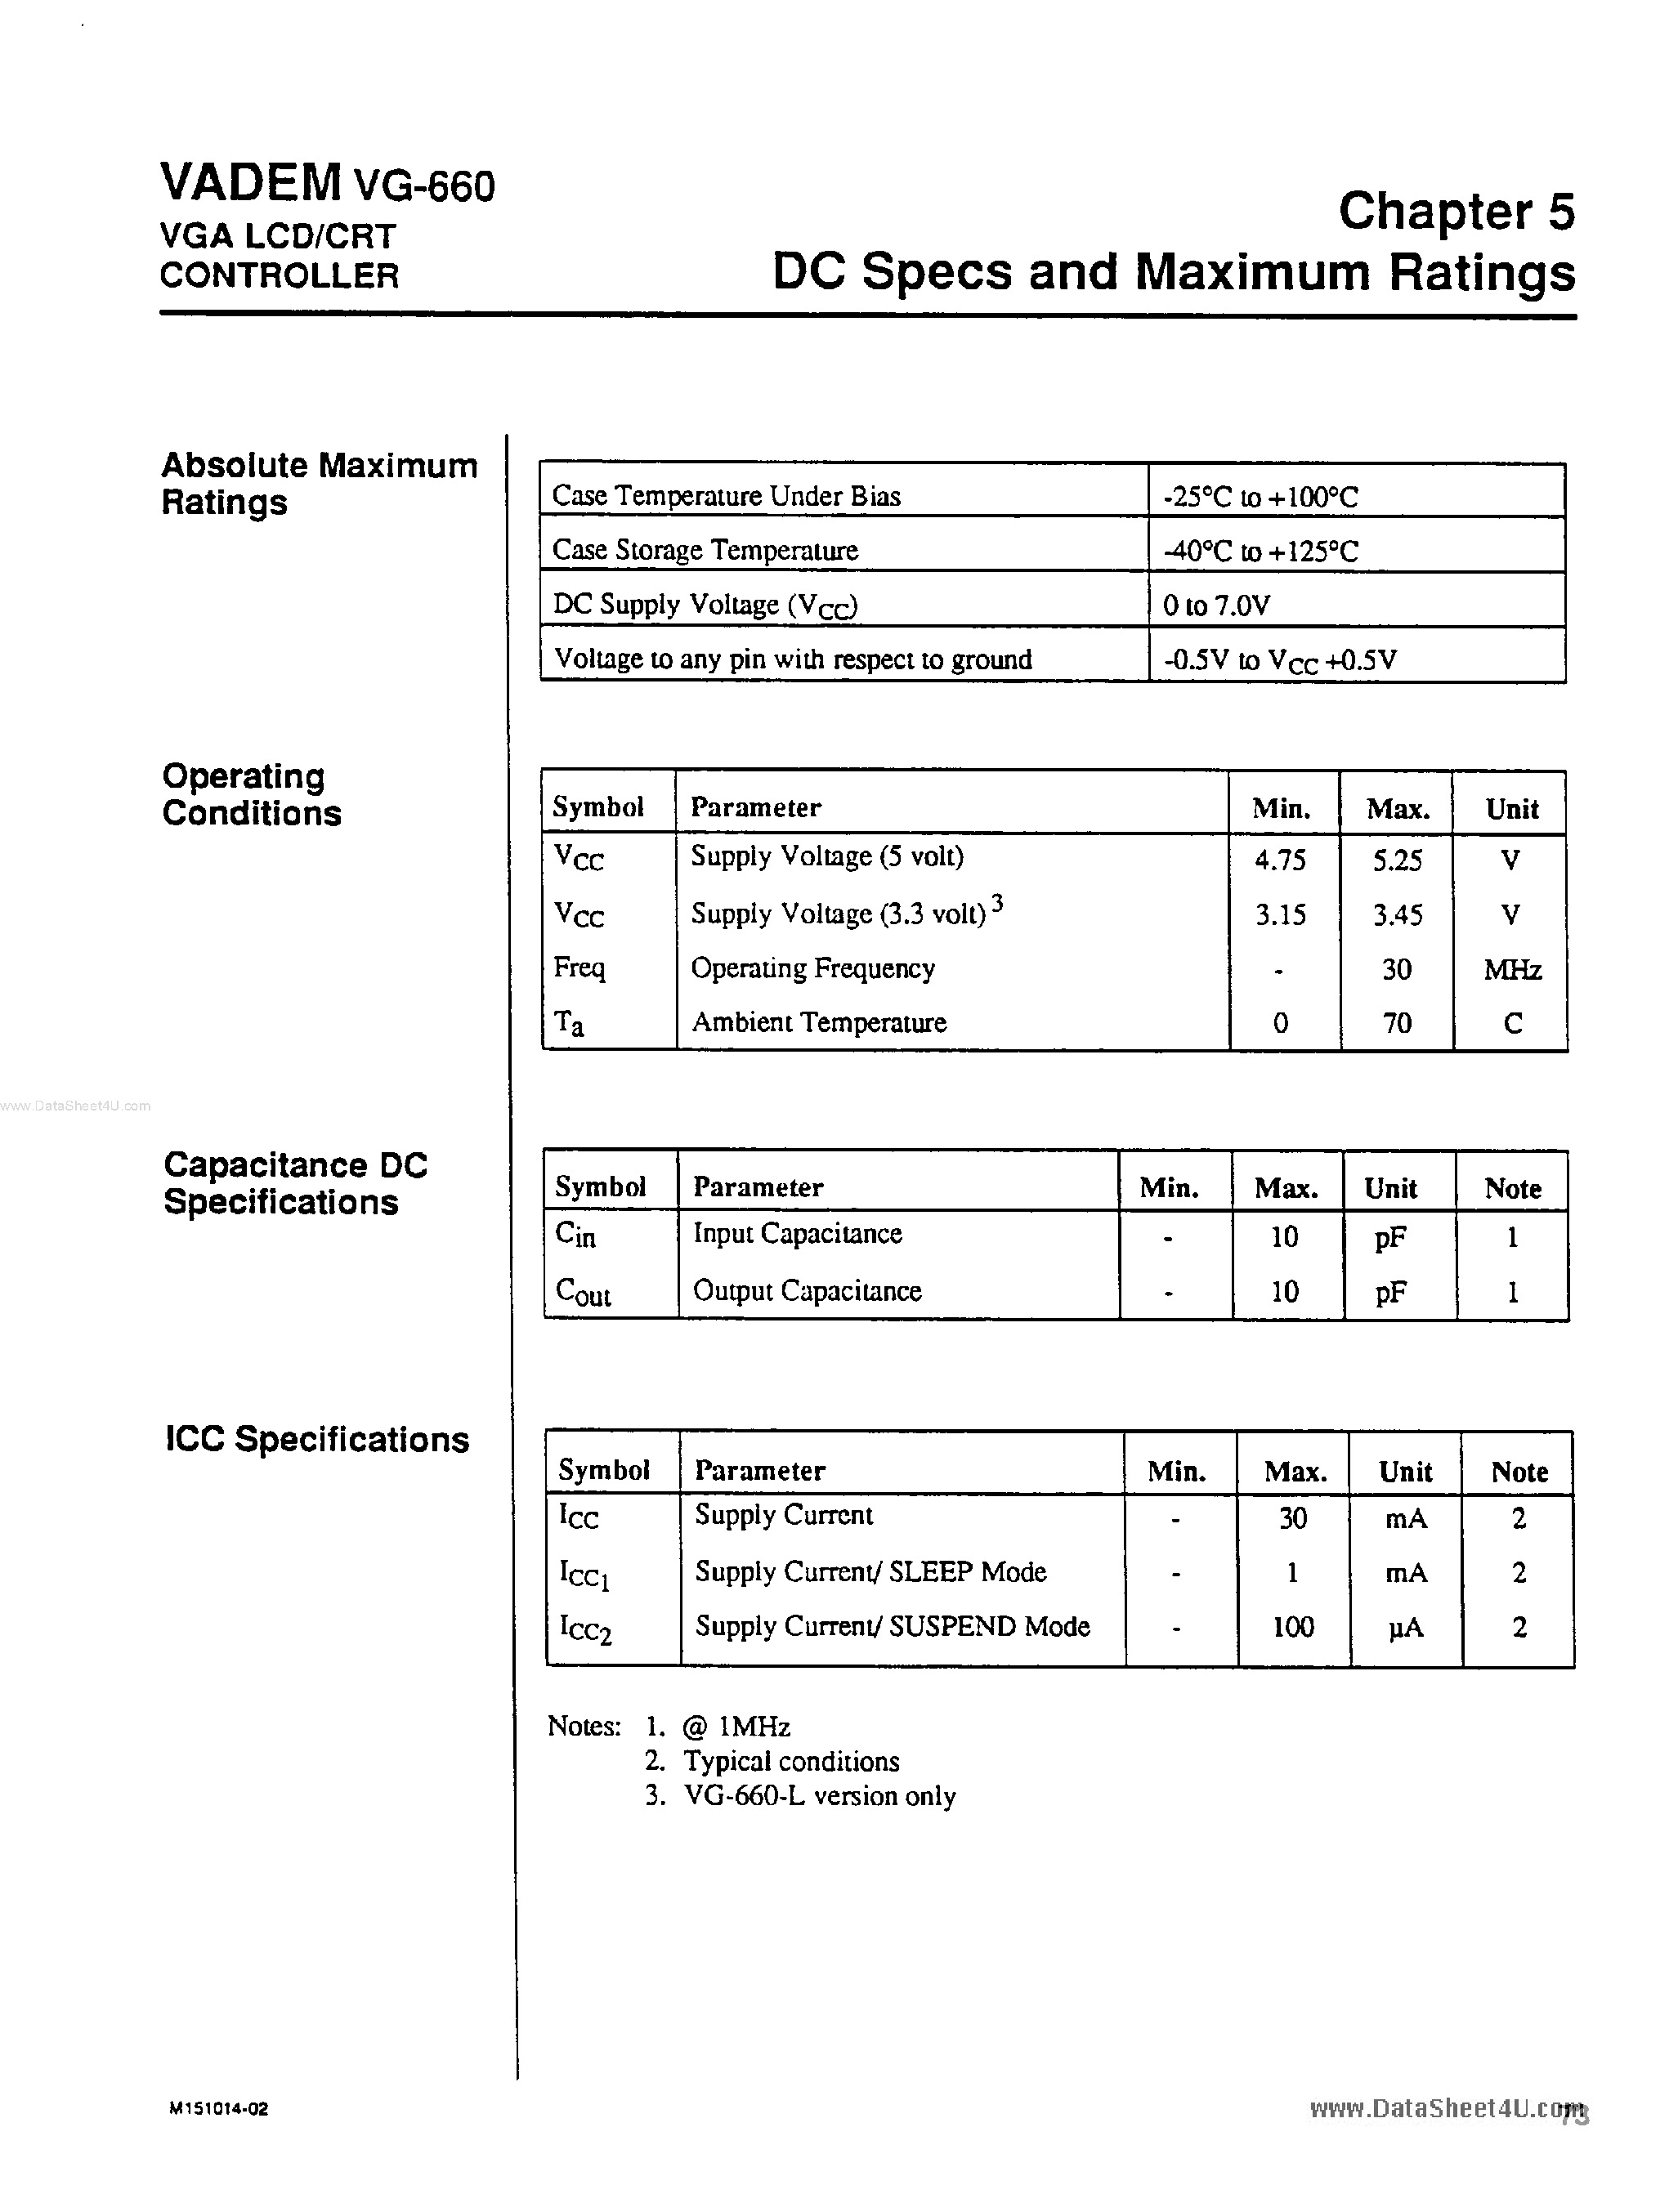 Datasheet VG-660 - DC Specs and Maximun Rating page 1